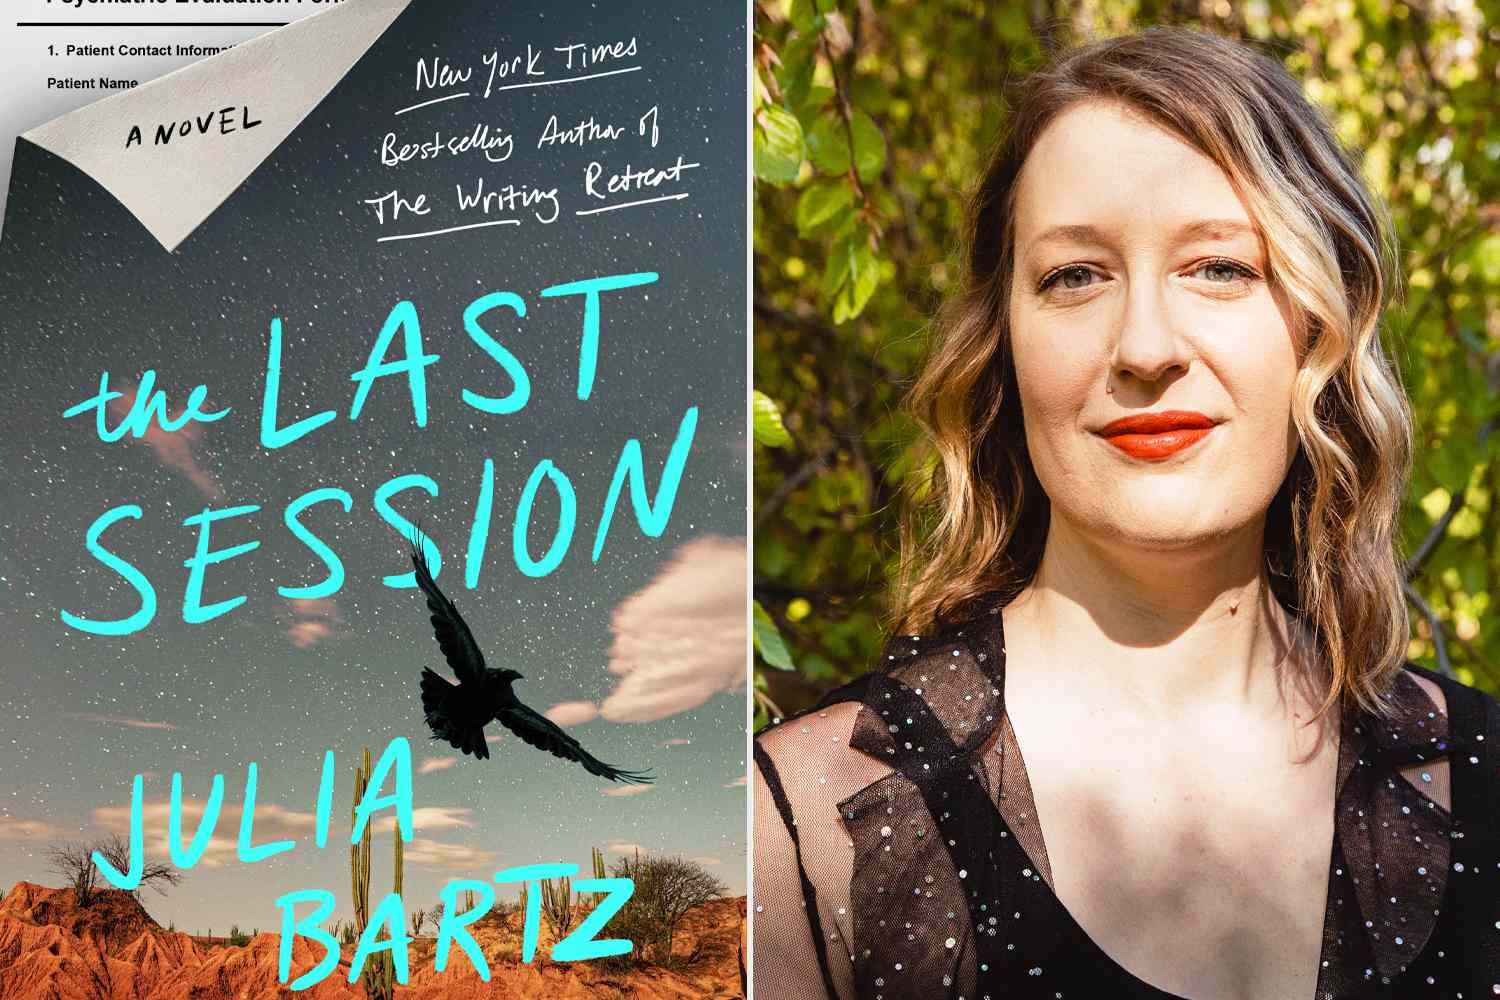 In Julia Bartz’s New Thriller, a Social Worker Comes to Terms With Her Troubling Past (Exclusive)